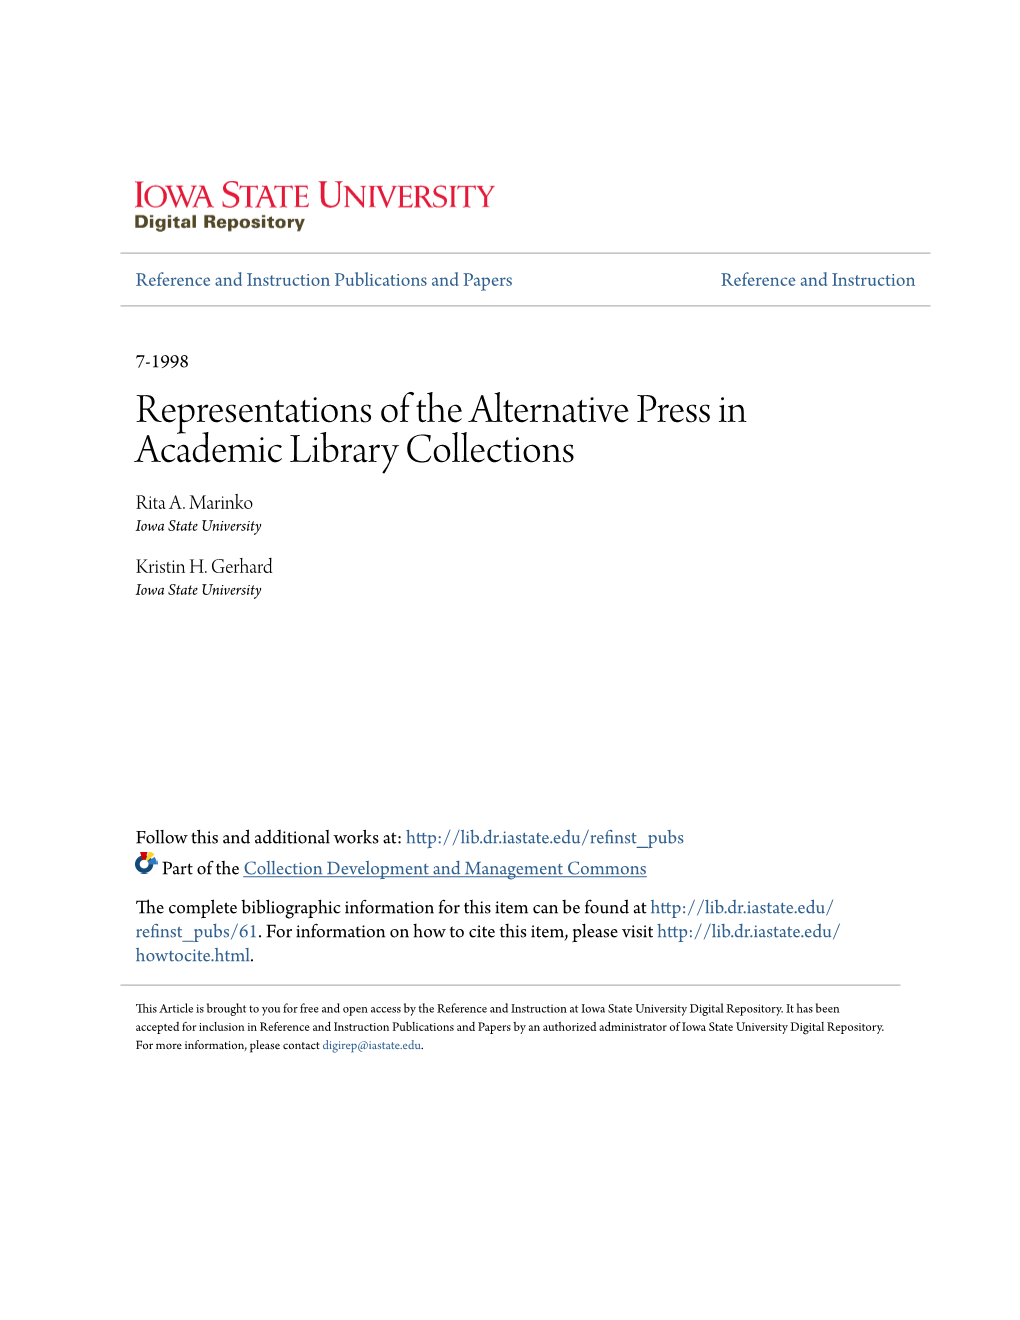 Representations of the Alternative Press in Academic Library Collections Rita A